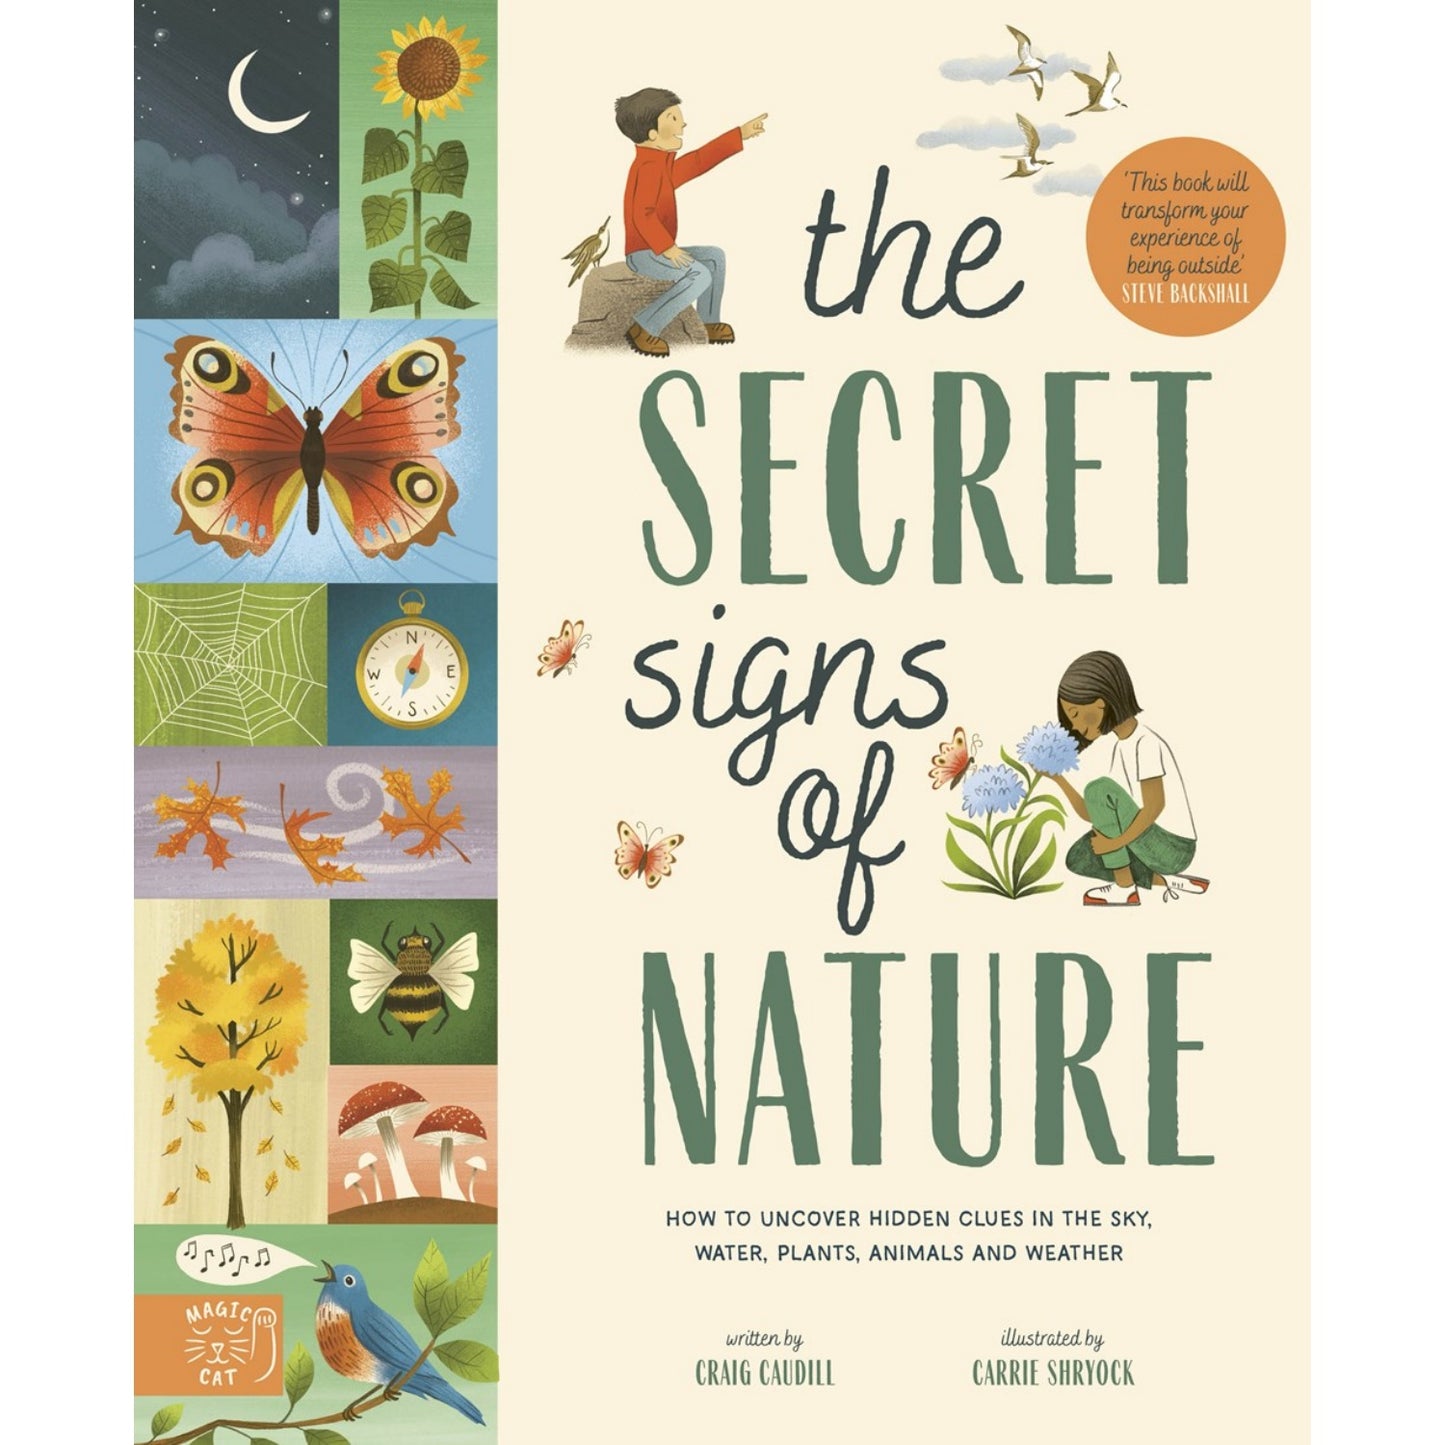 The Secret Signs of Nature | Hardcover | Children's Book on Nature